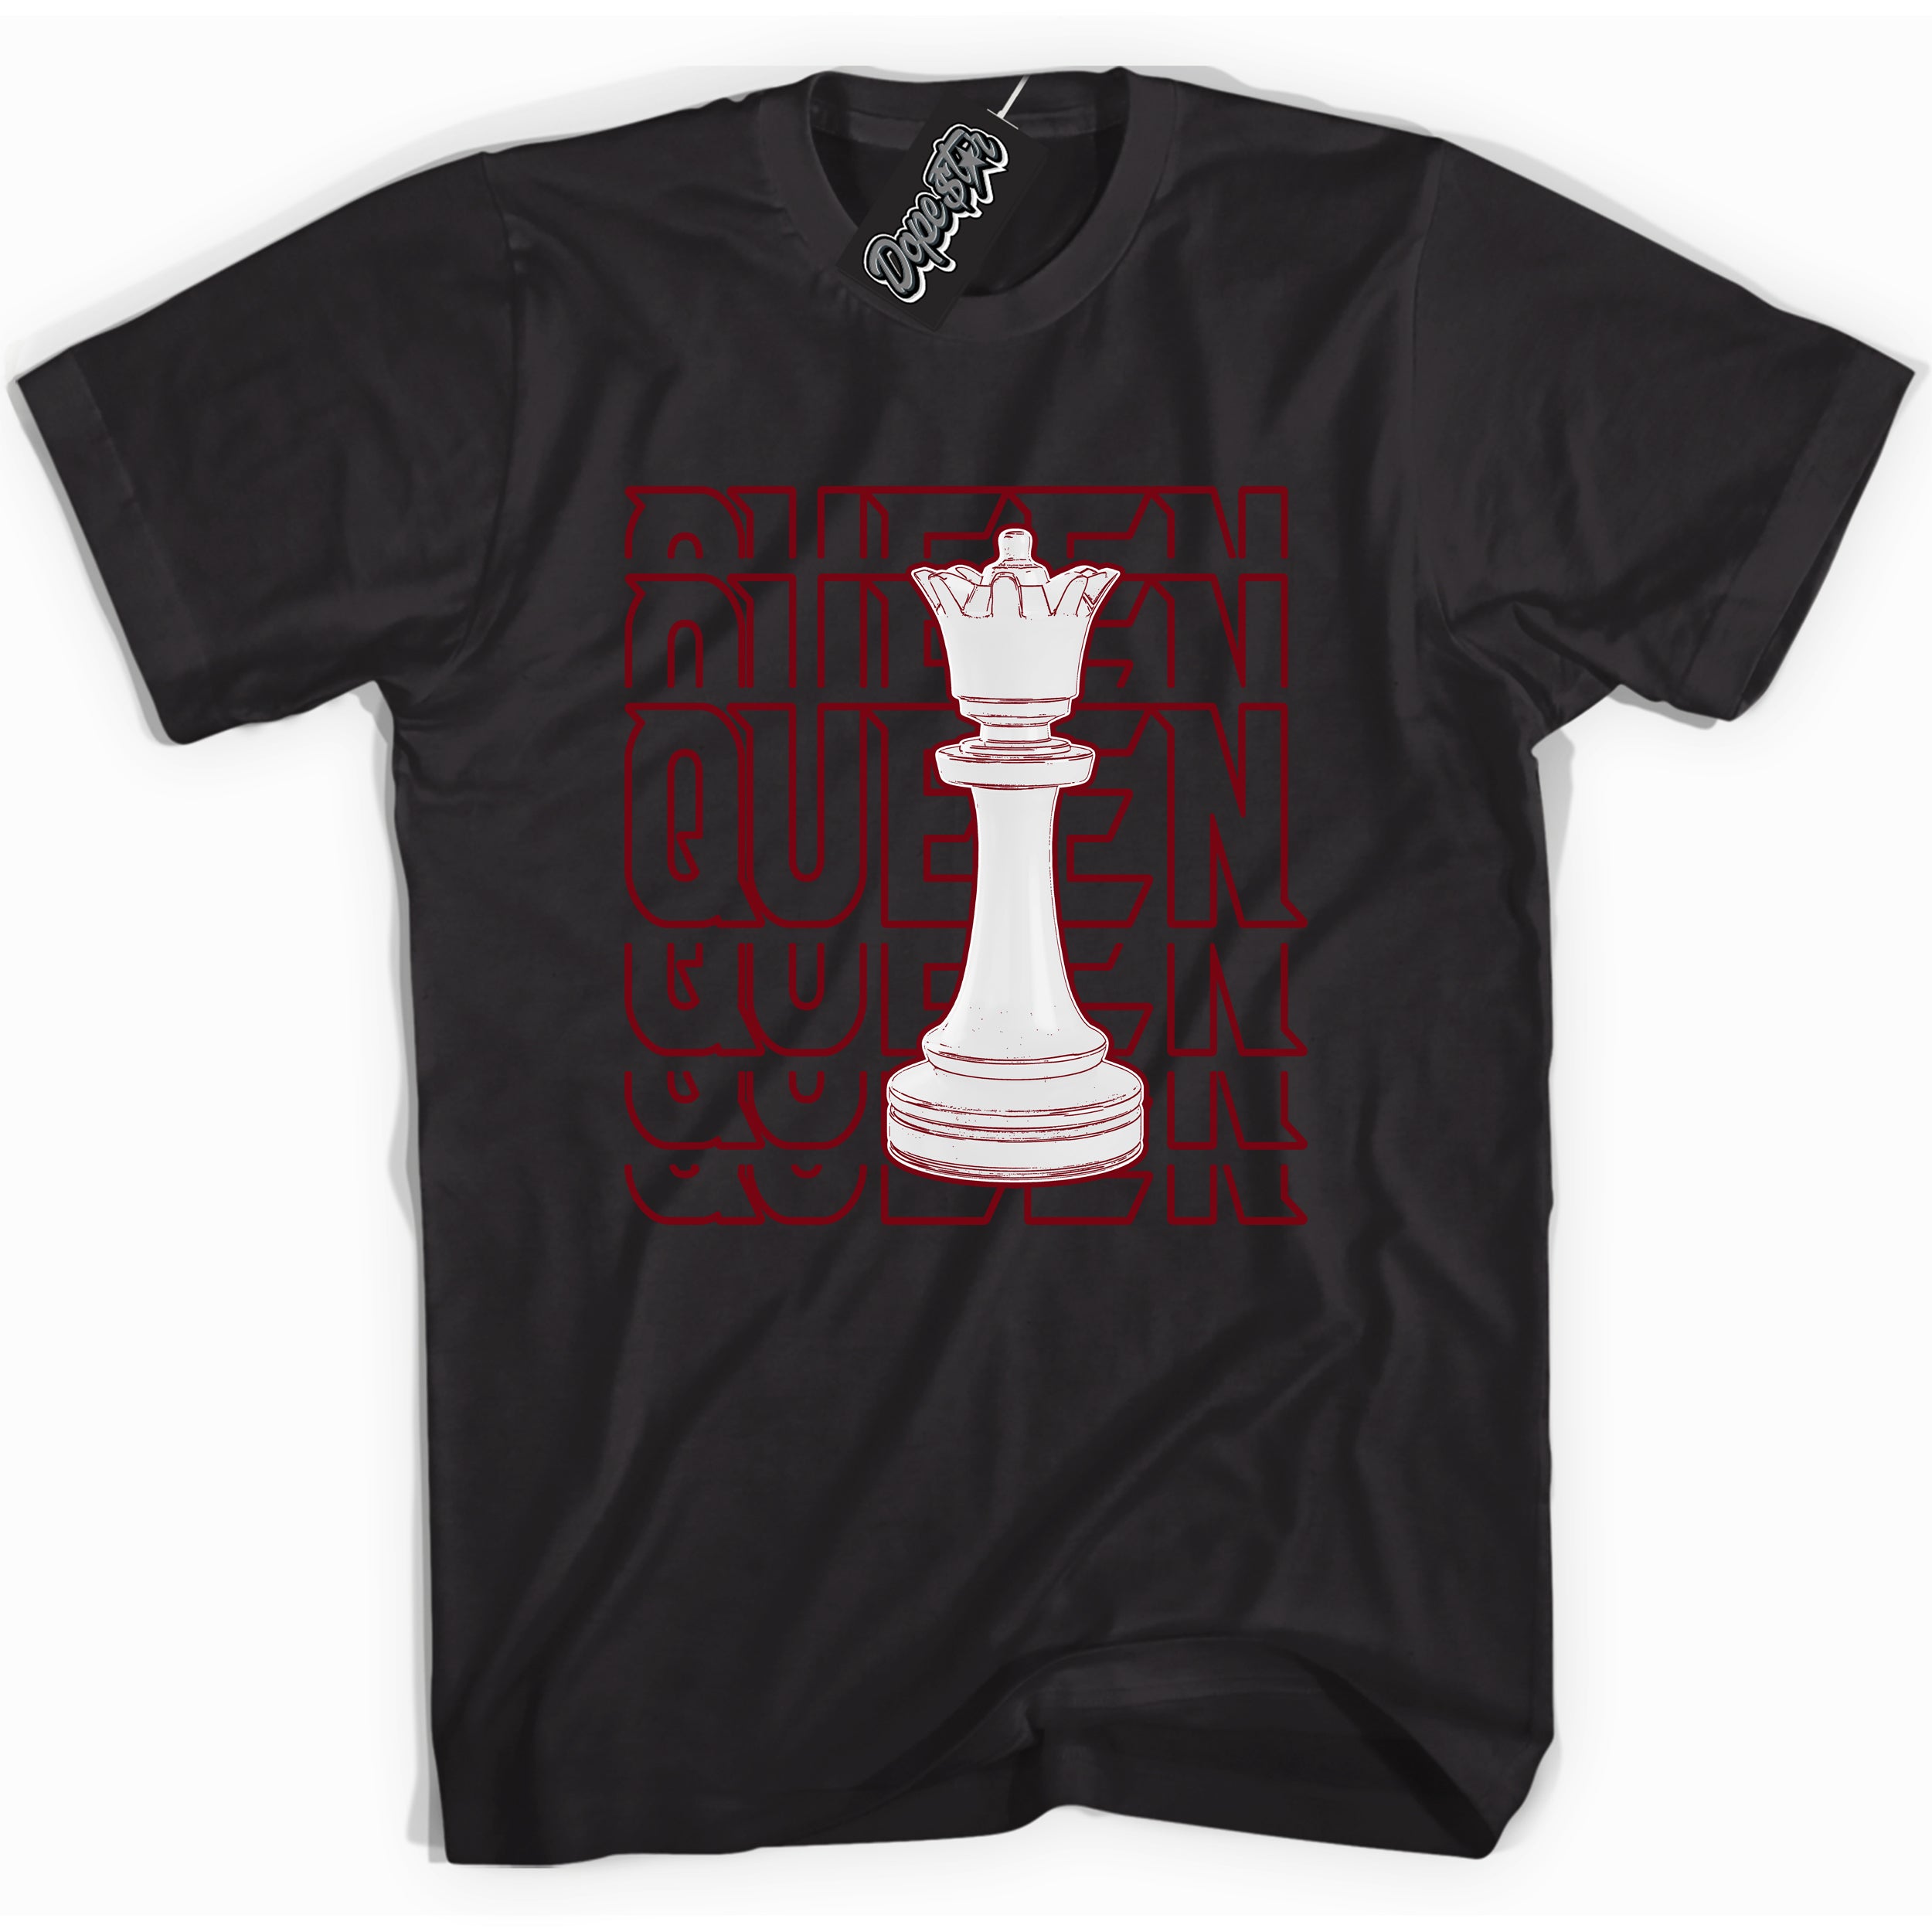 Cool Black graphic tee with “ Queen Chess ” print, that perfectly matches OG Metallic Burgundy 1s sneakers 